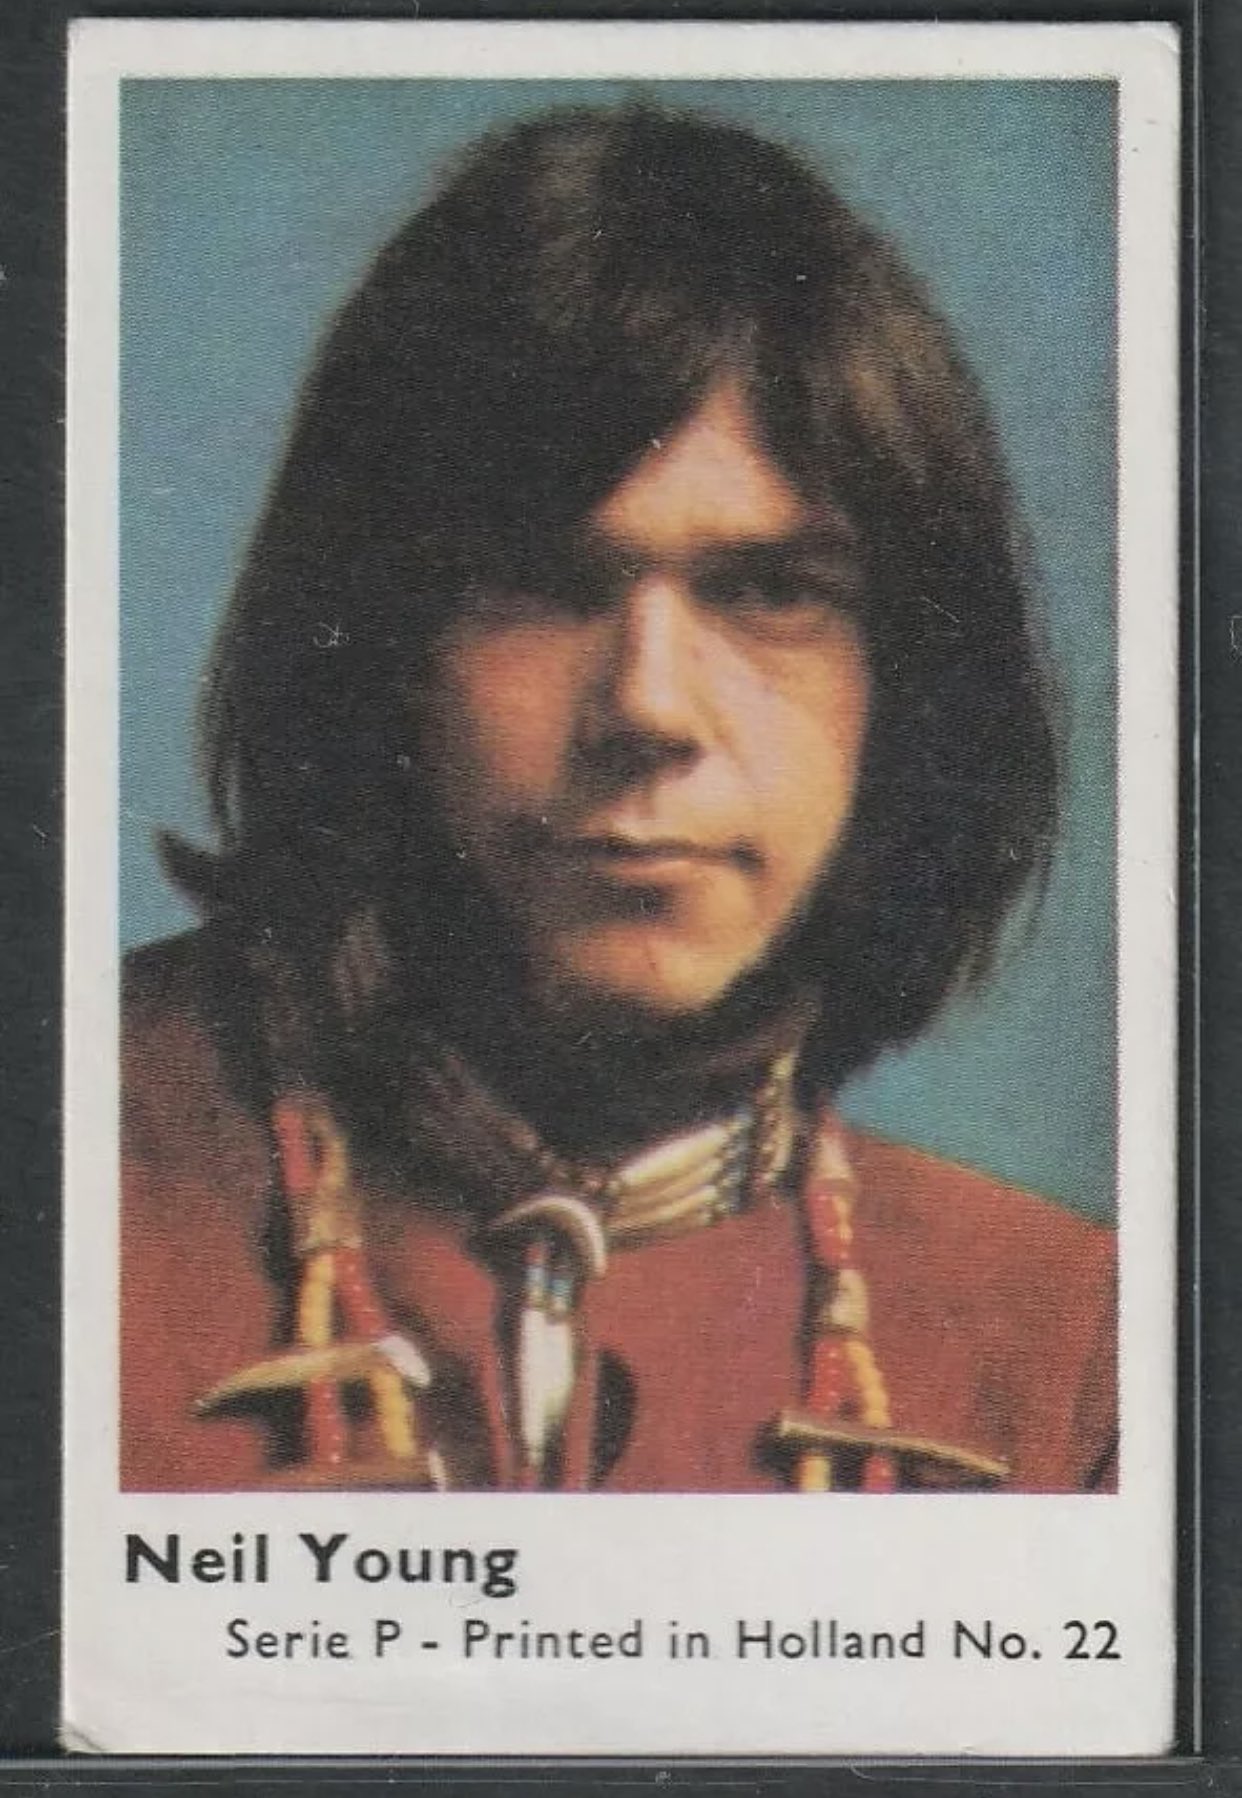 Happy birthday to Neil Young! Long may he run. 